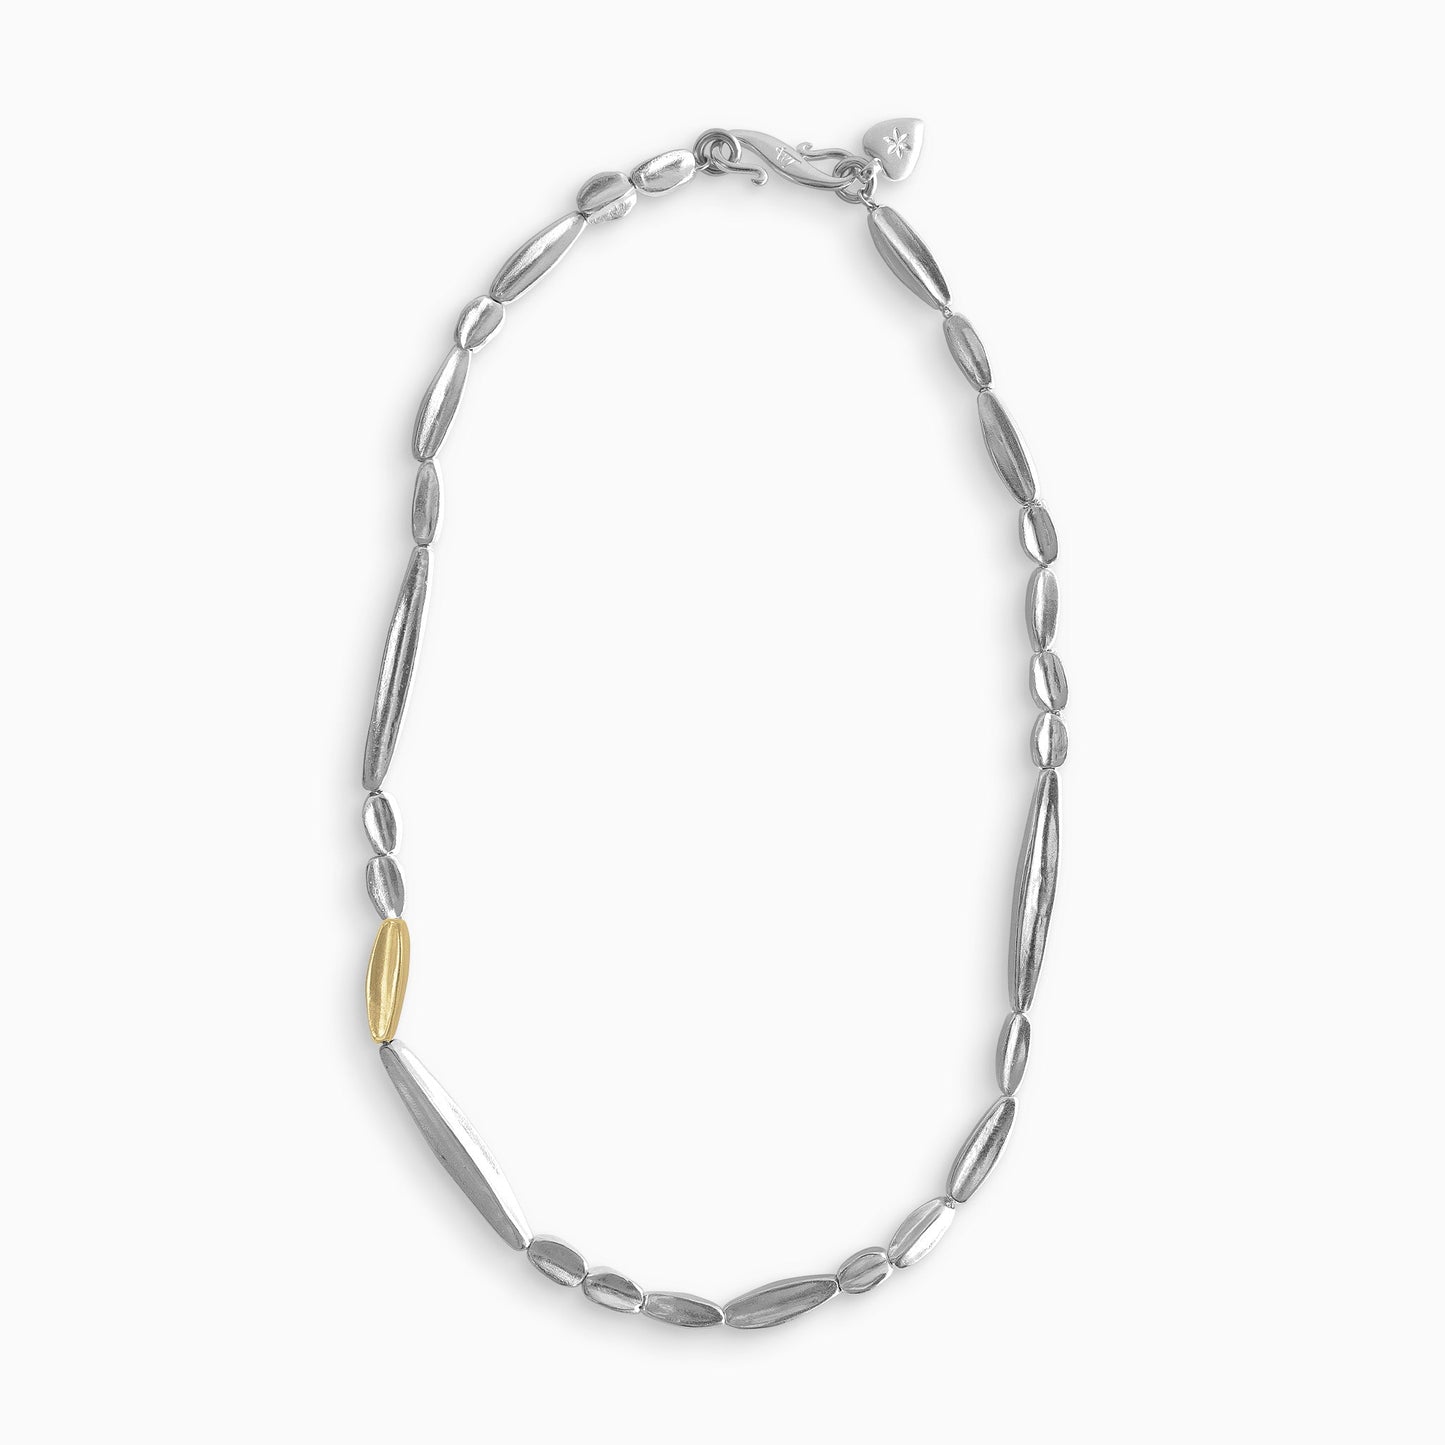 A necklace of recycled Silver handmade solid beads with an accent of a single 18ct Fairtrade yellow gold bead. Beads are varying lengths randomly arranged, The length of the necklace is 45cm. Each bead is tapered at the ends, concave and square in section, gently organic with a strong weight. Beads are approximately from 10mm to 29mm in length, 5mm square at the centres and 2mm square at the tapered ends.